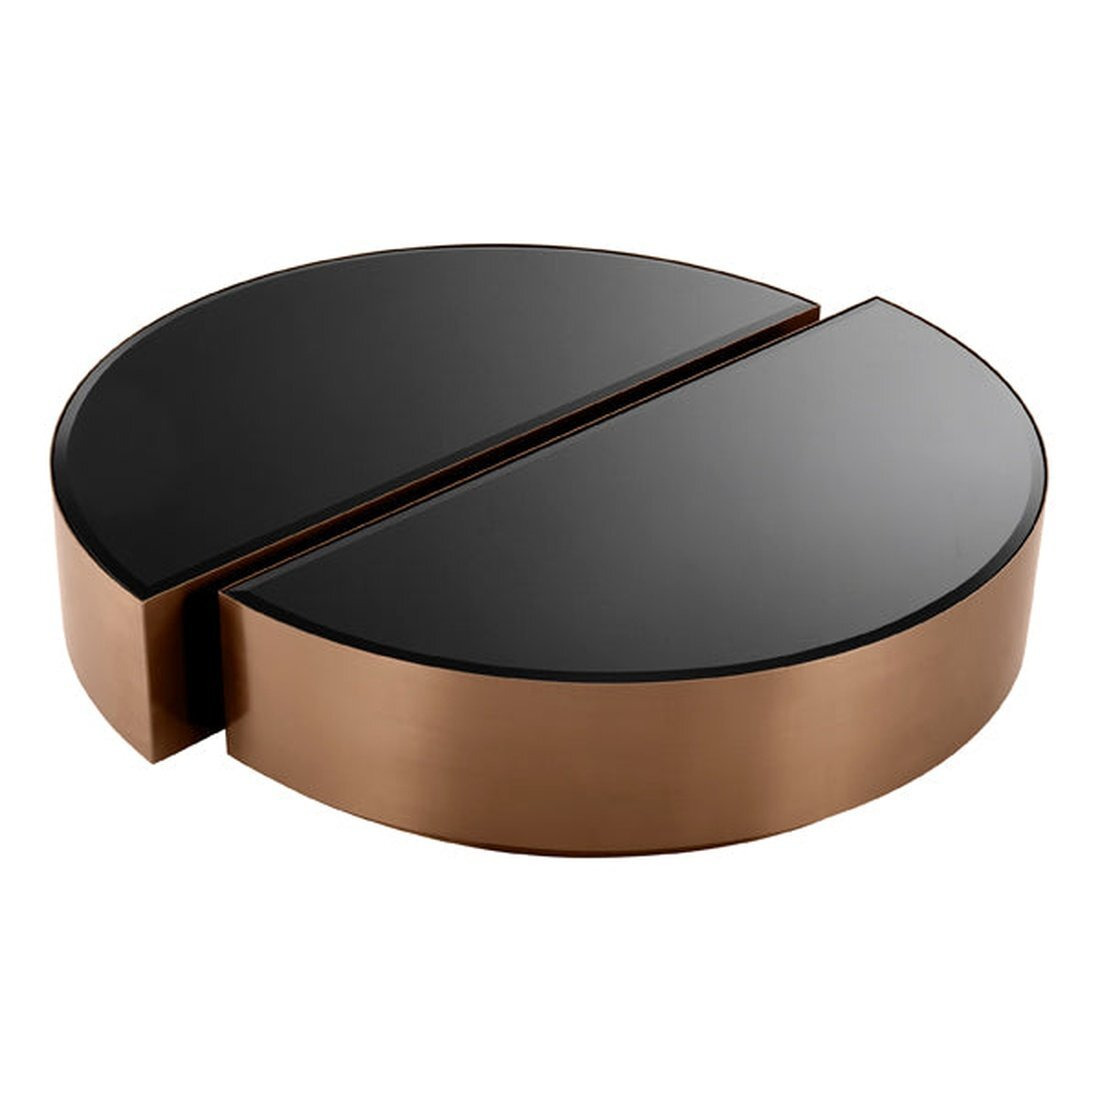 Eichholtz Astra Coffee Table Brushed Copper - image 1